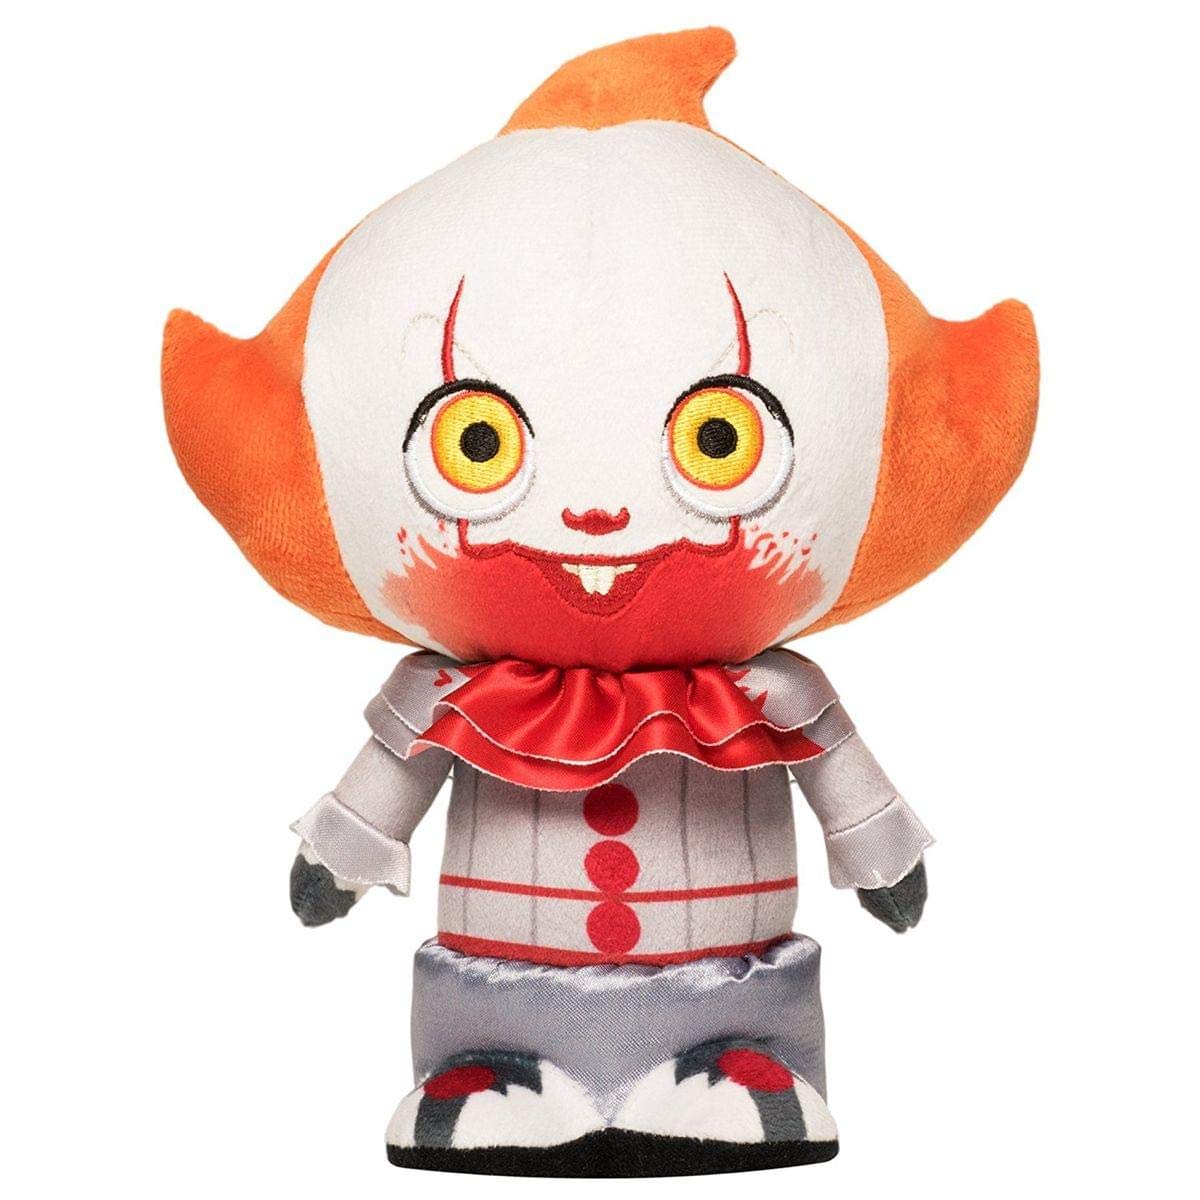 Funko Plush - IT - Pennywise - Bloody Mouth - Super Cute